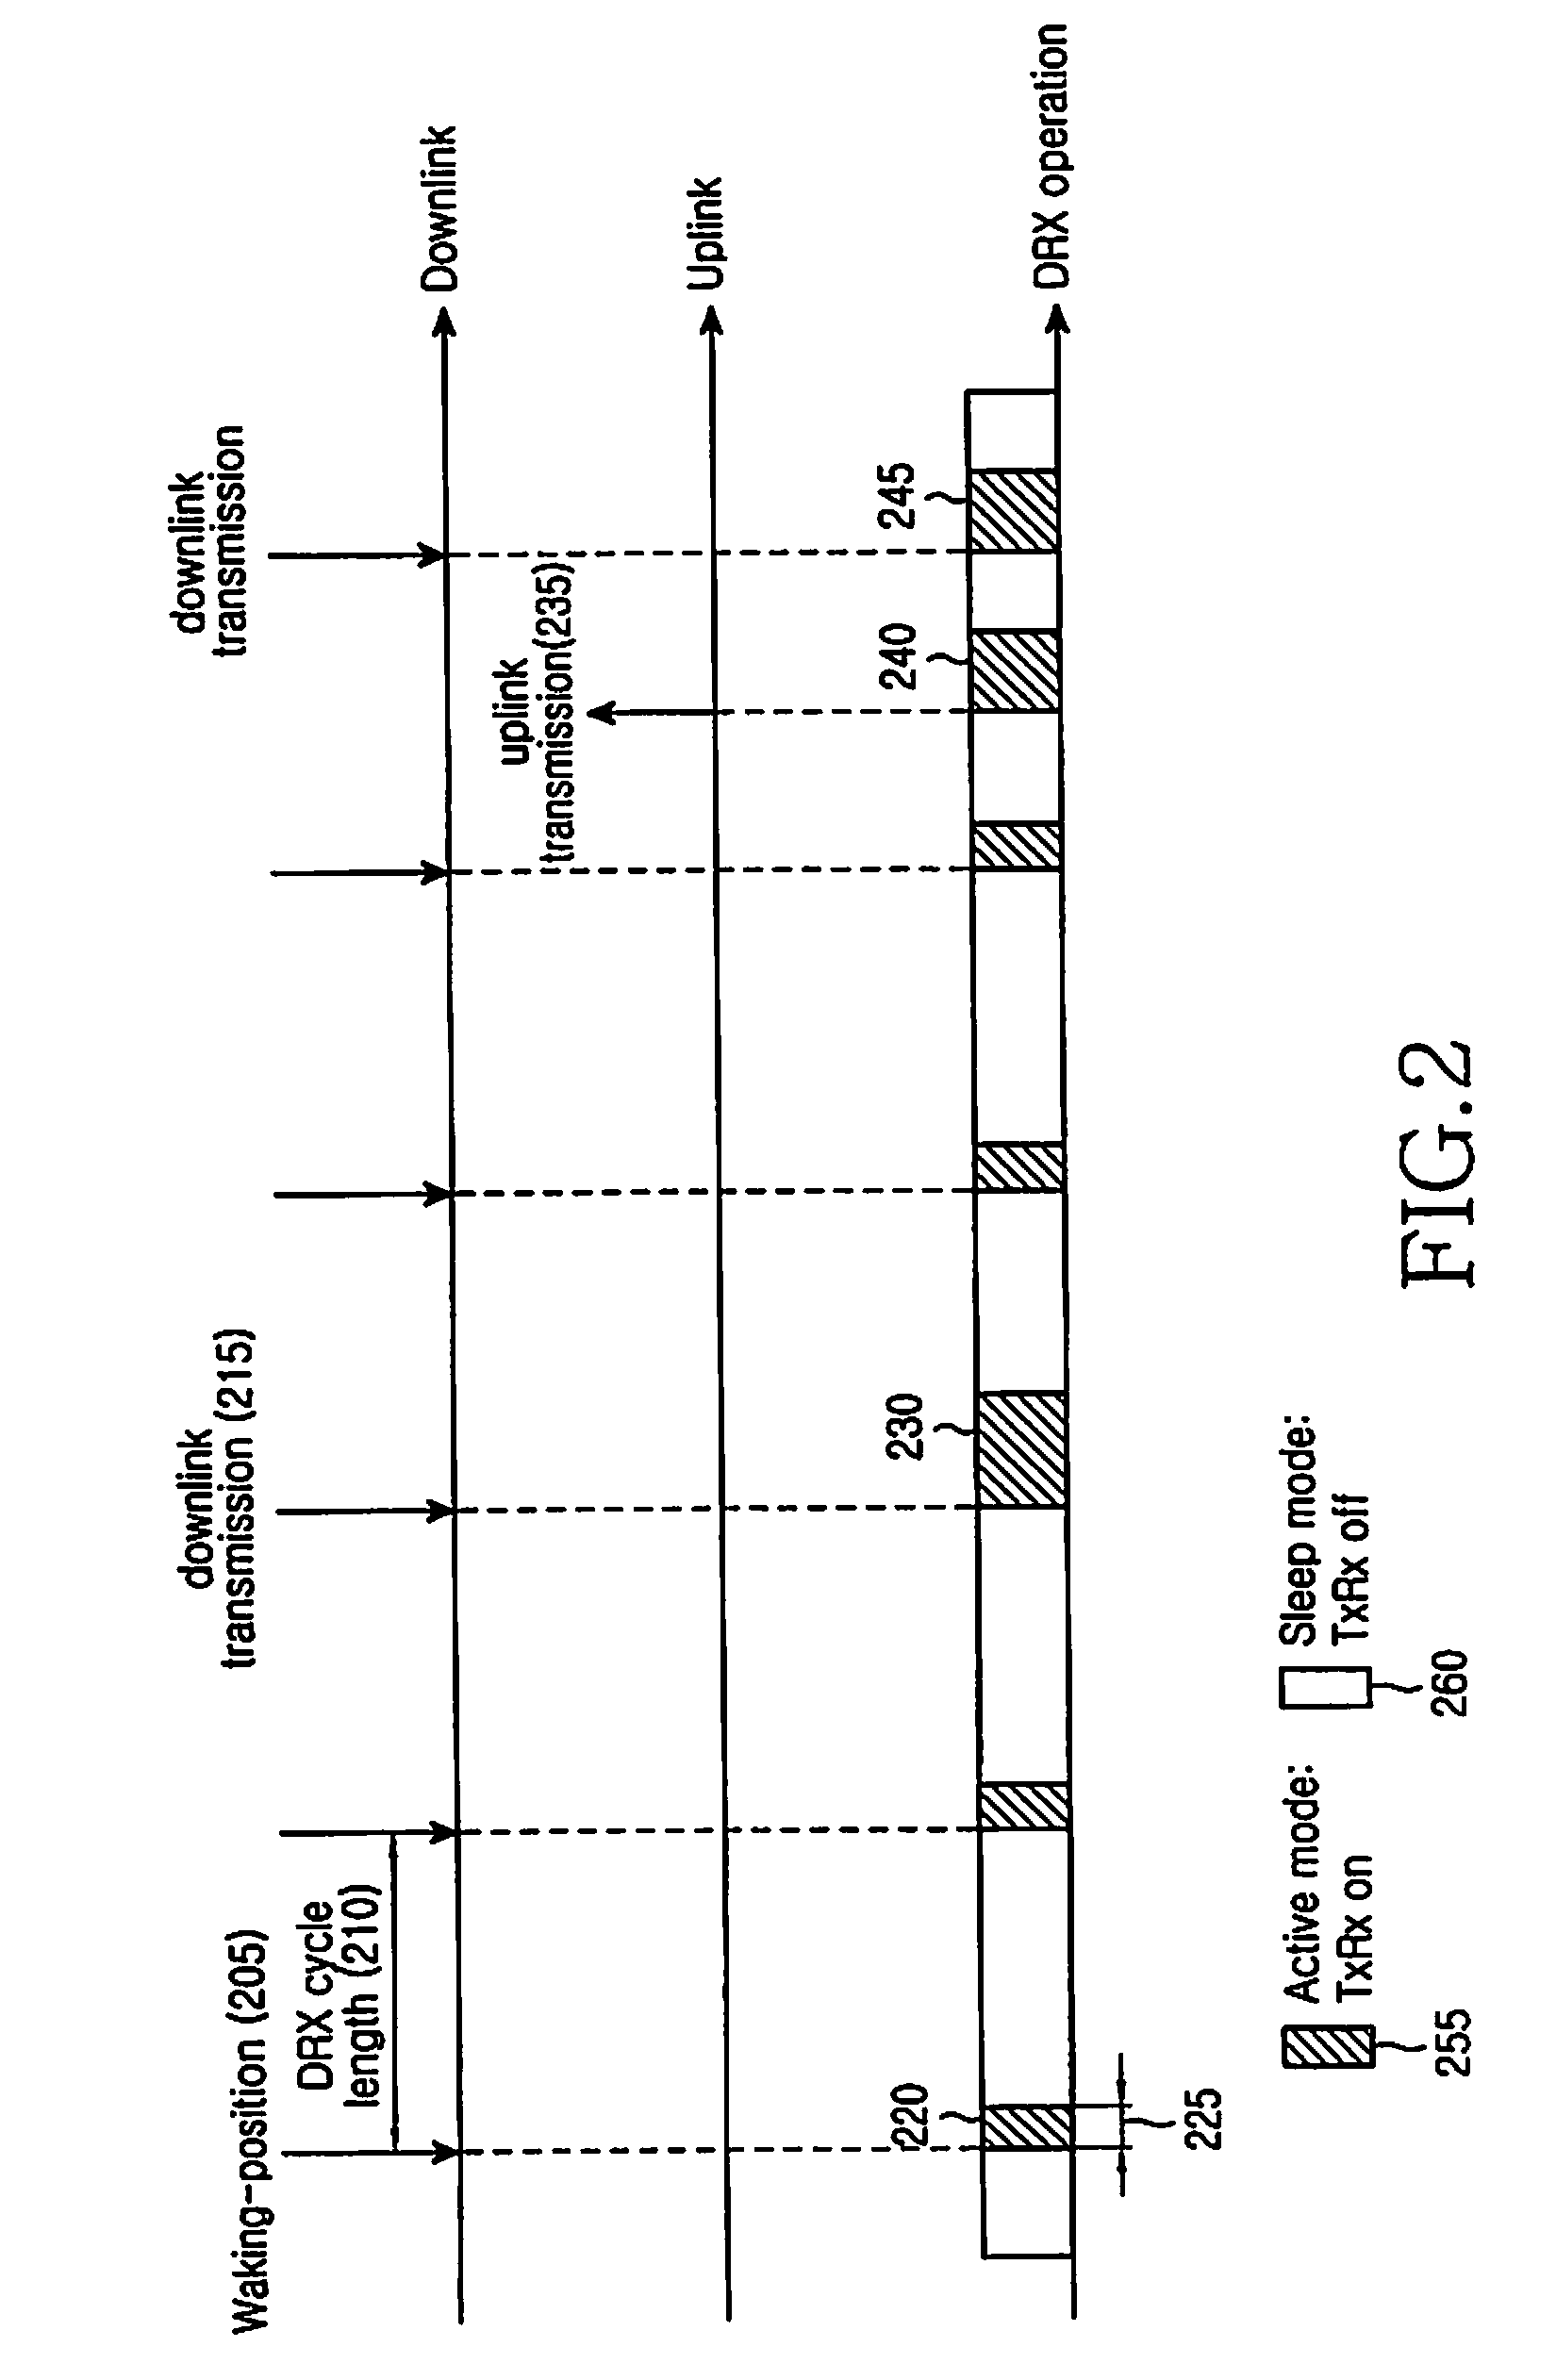 Method and apparatus for performing handover of user equipment (UE) during discontinuous reception (DRX) operation in mobile communication system